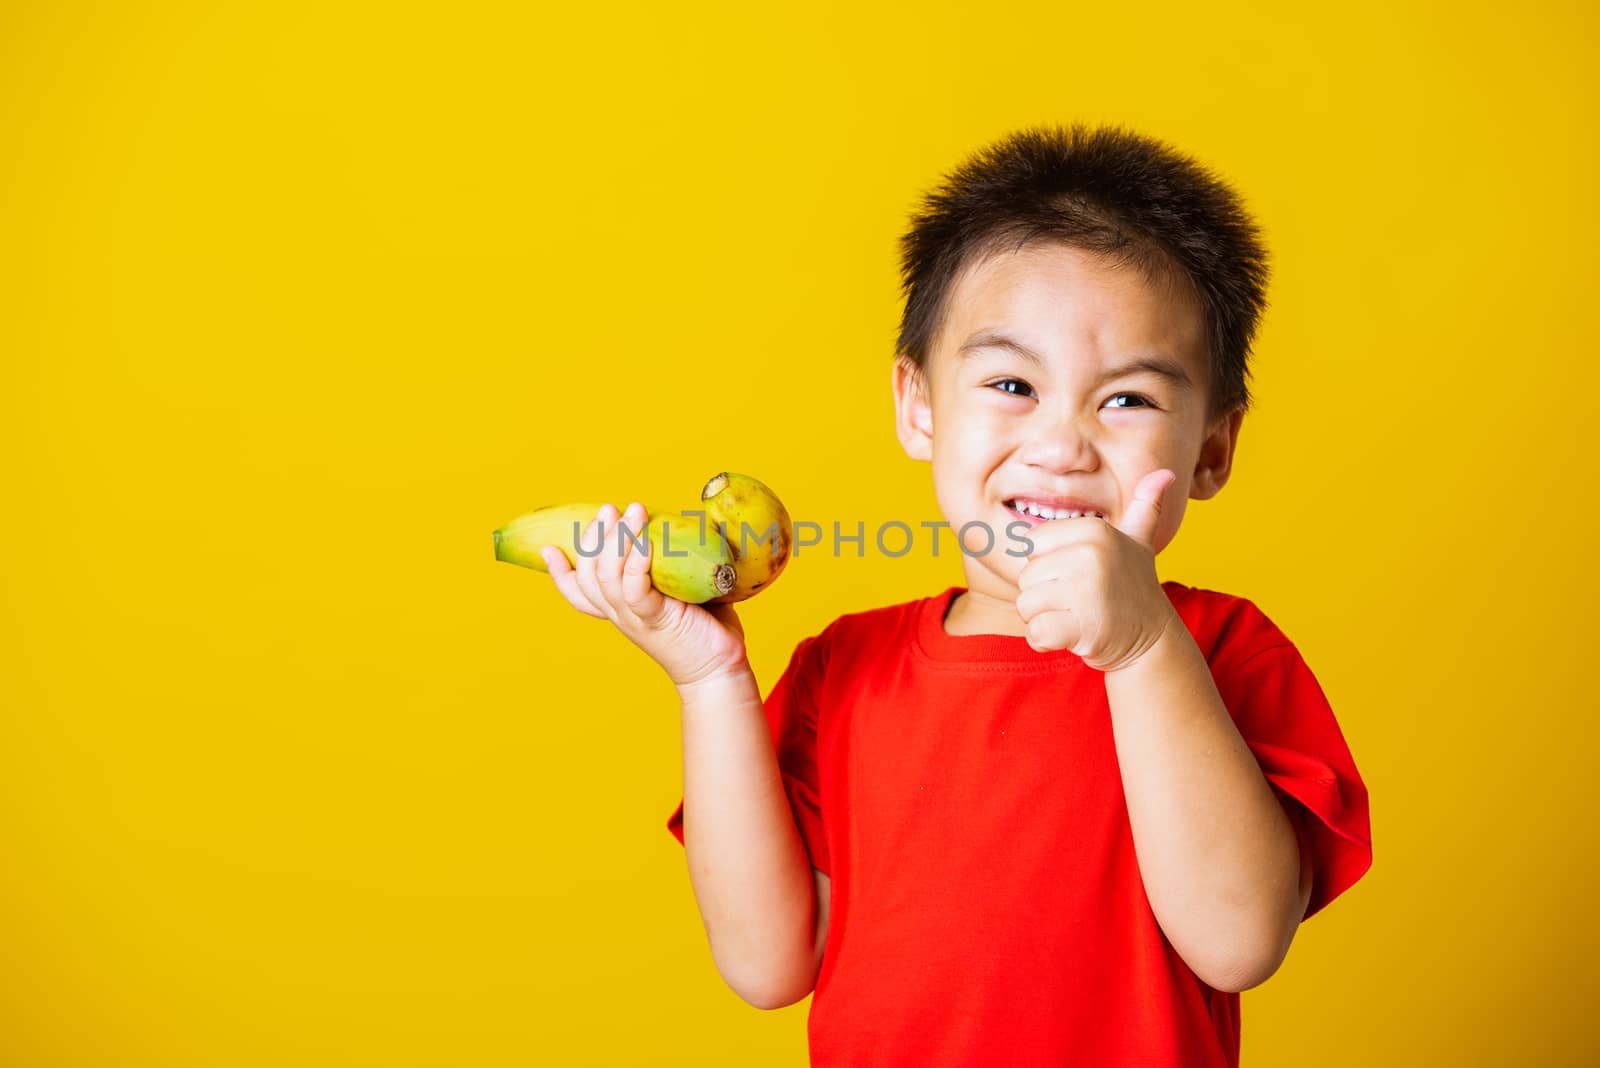 kid cute little boy attractive smile playing holds bananas and s by Sorapop